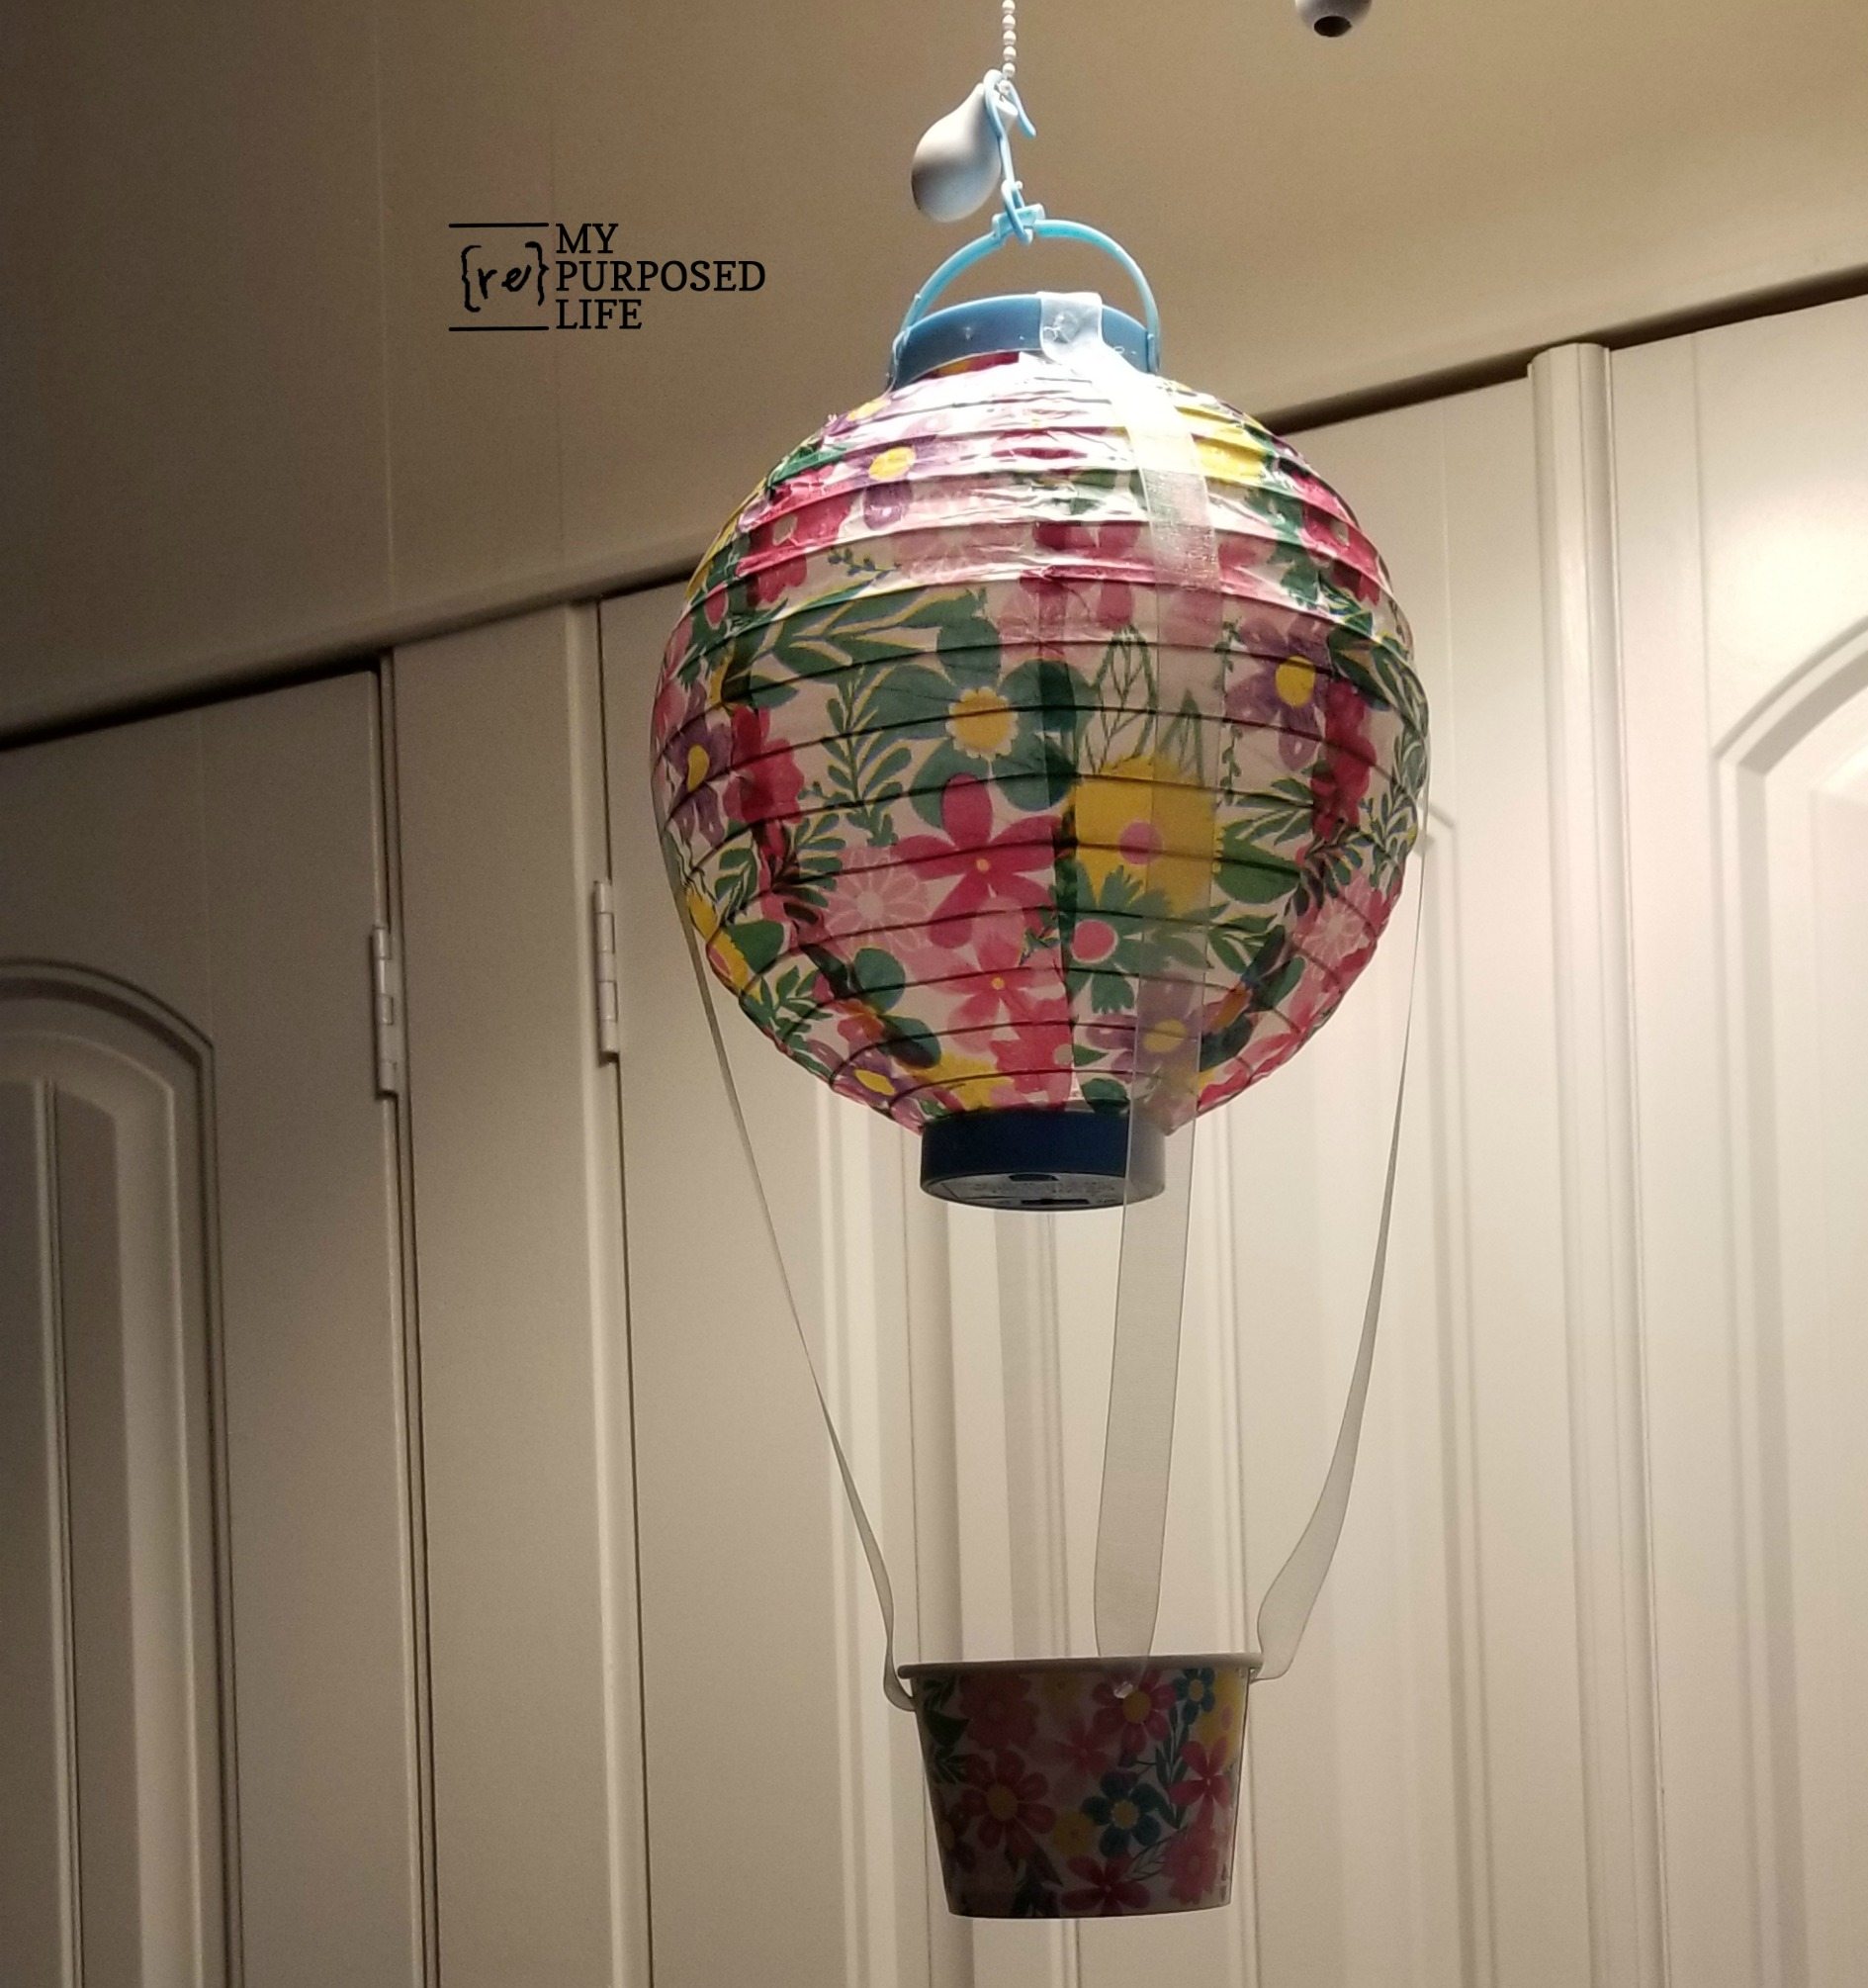 https://www.myrepurposedlife.com/wp-content/uploads/2018/04/how-to-make-a-hot-air-balloon-out-of-a-chinese-lantern-from-the-dollar-store-MyRepurposedLife.com_.jpg